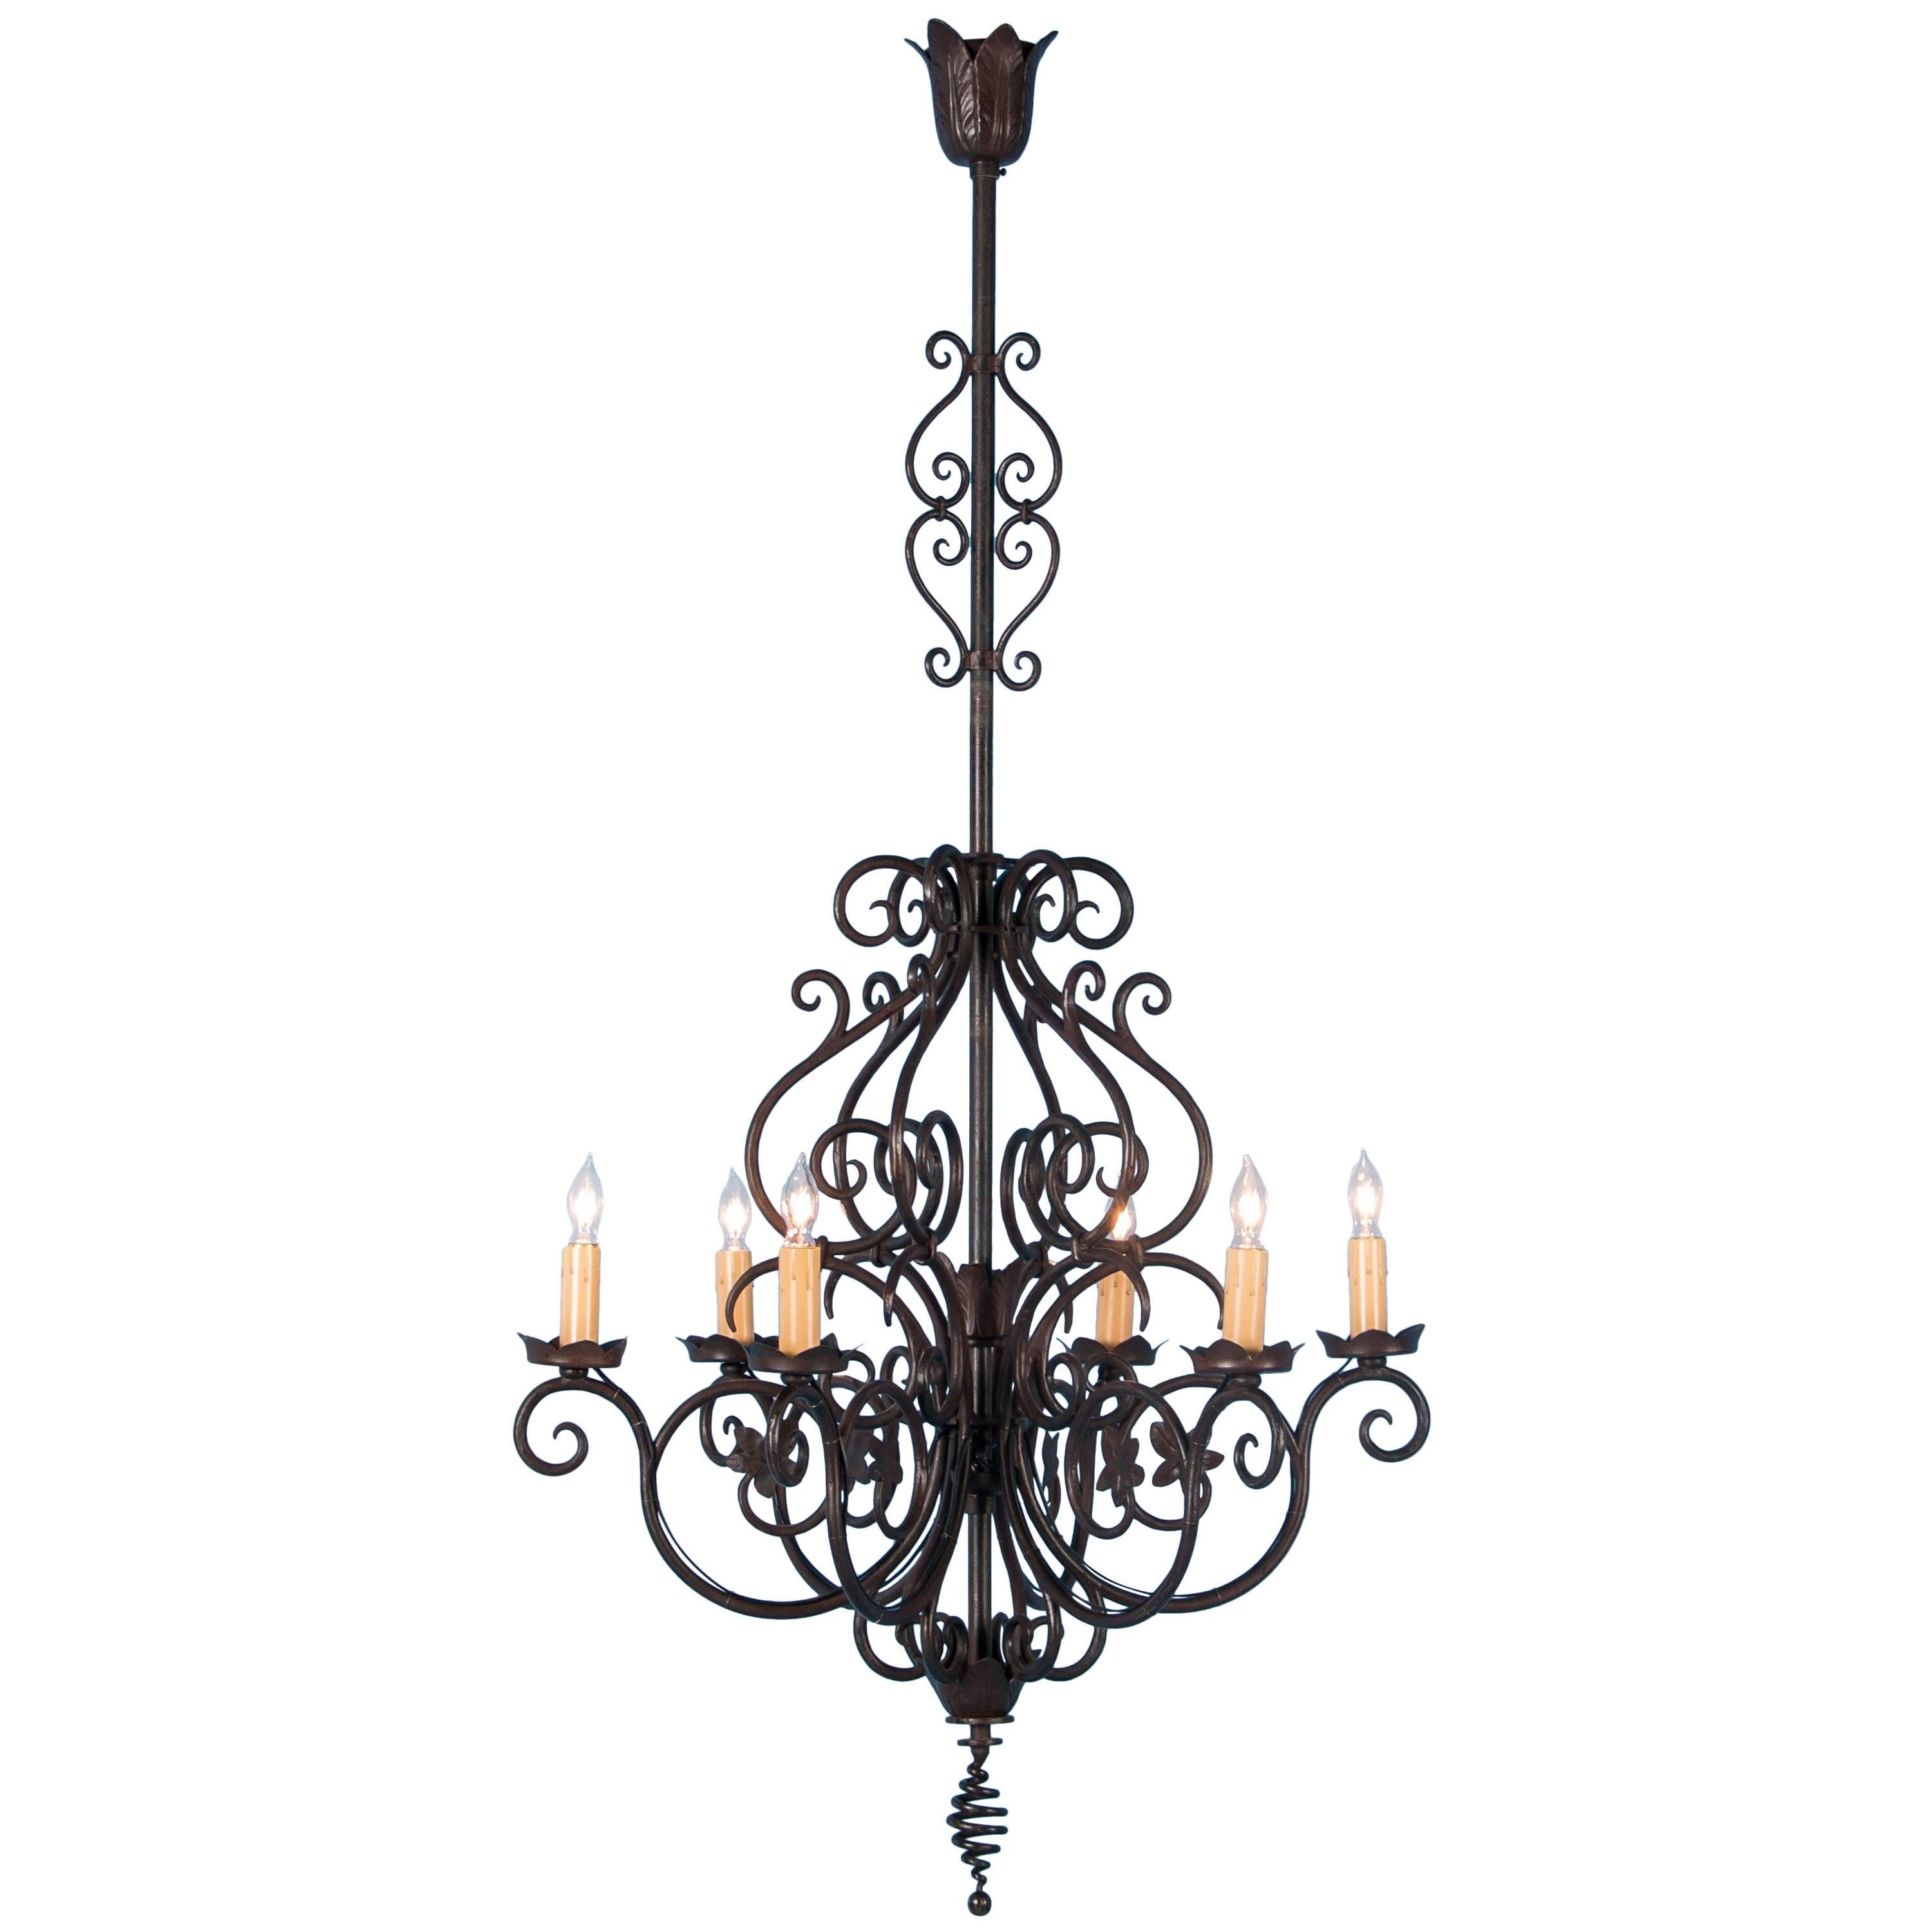 Antique French Six-Light Wrought Iron Chandelier